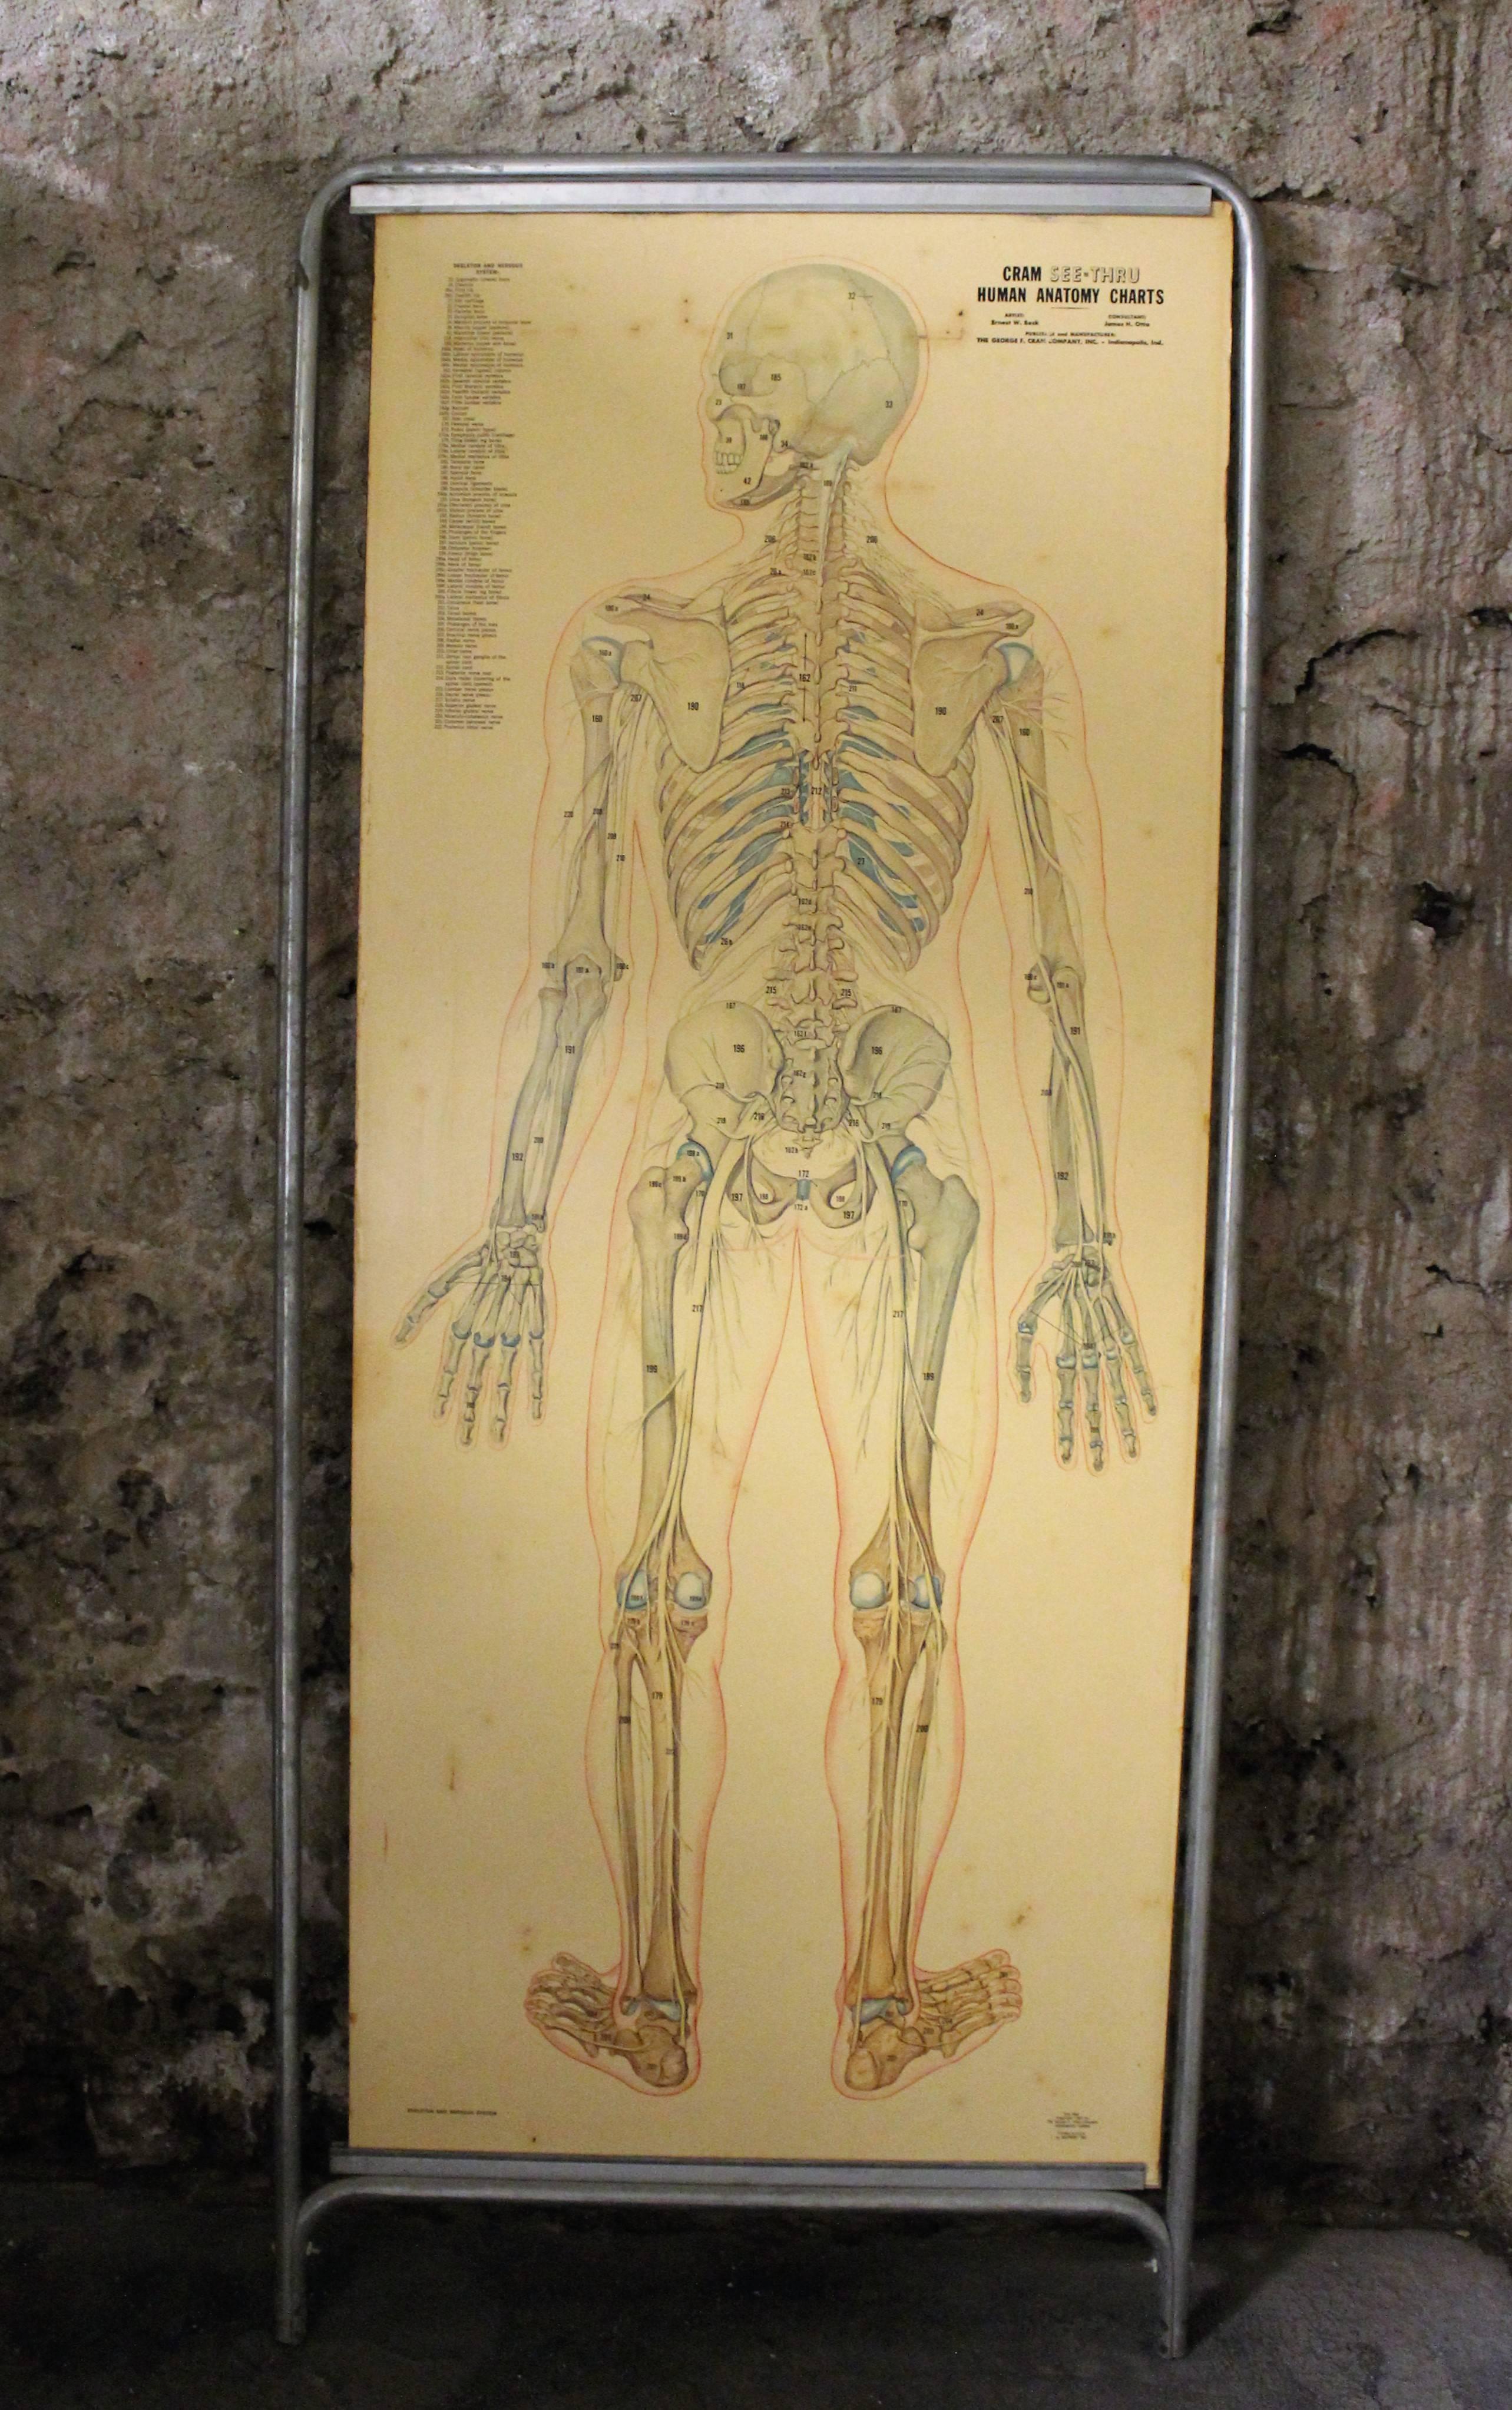 American Medical Anatomy Chart Titled 'Thin Man' For Sale